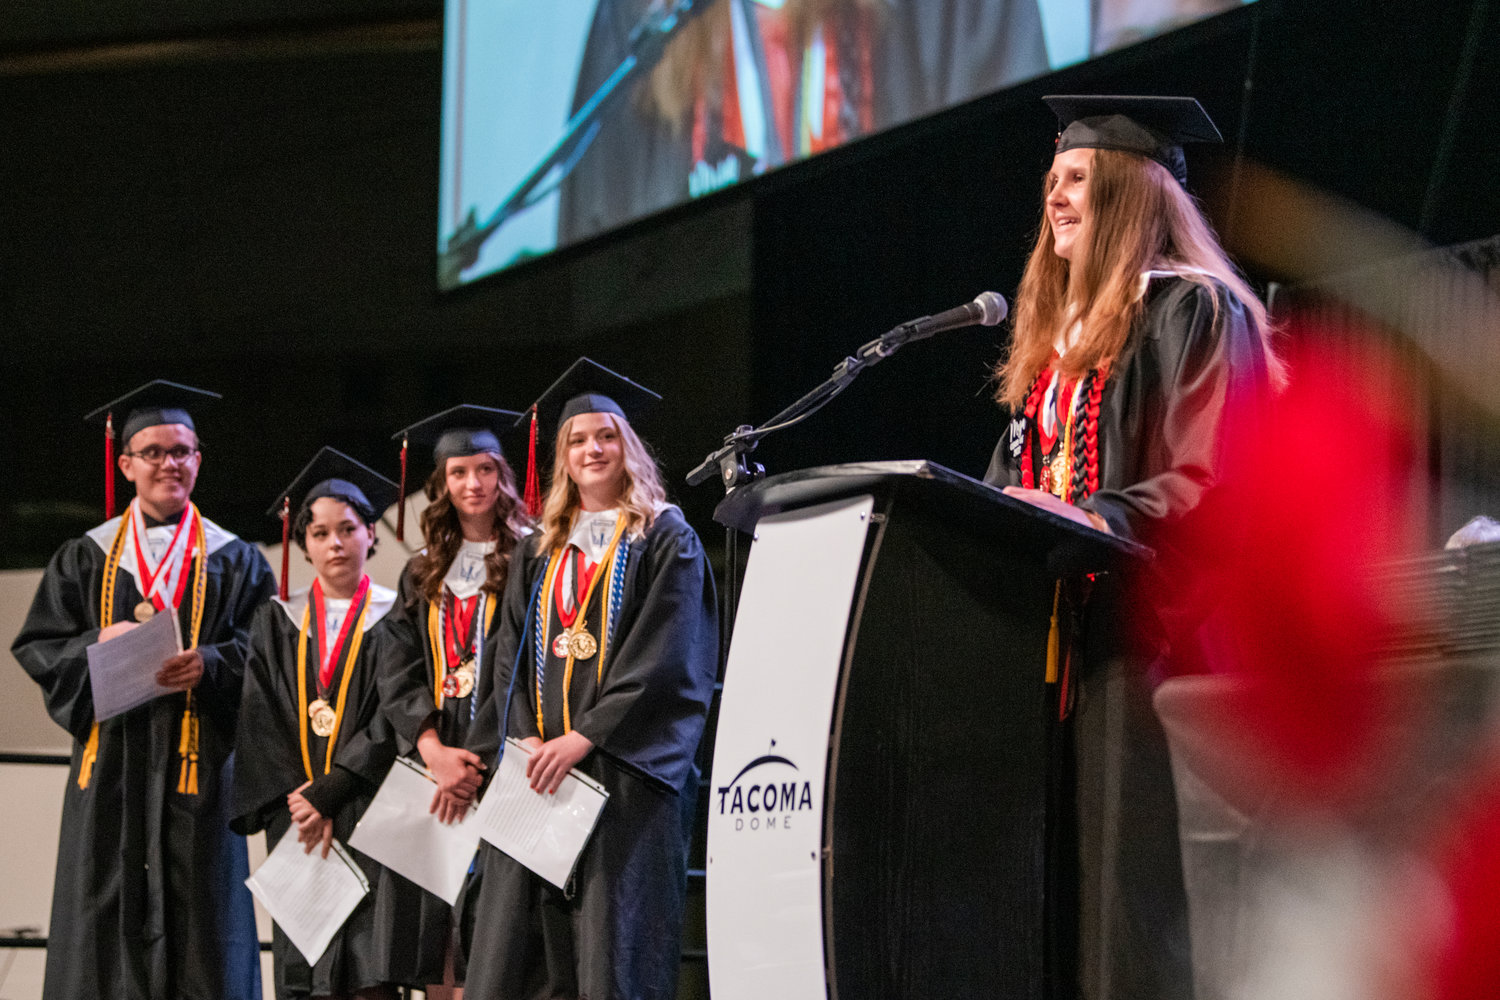 The Yelm High School class graduated during a ceremony at the Tacoma Dome on June 16.